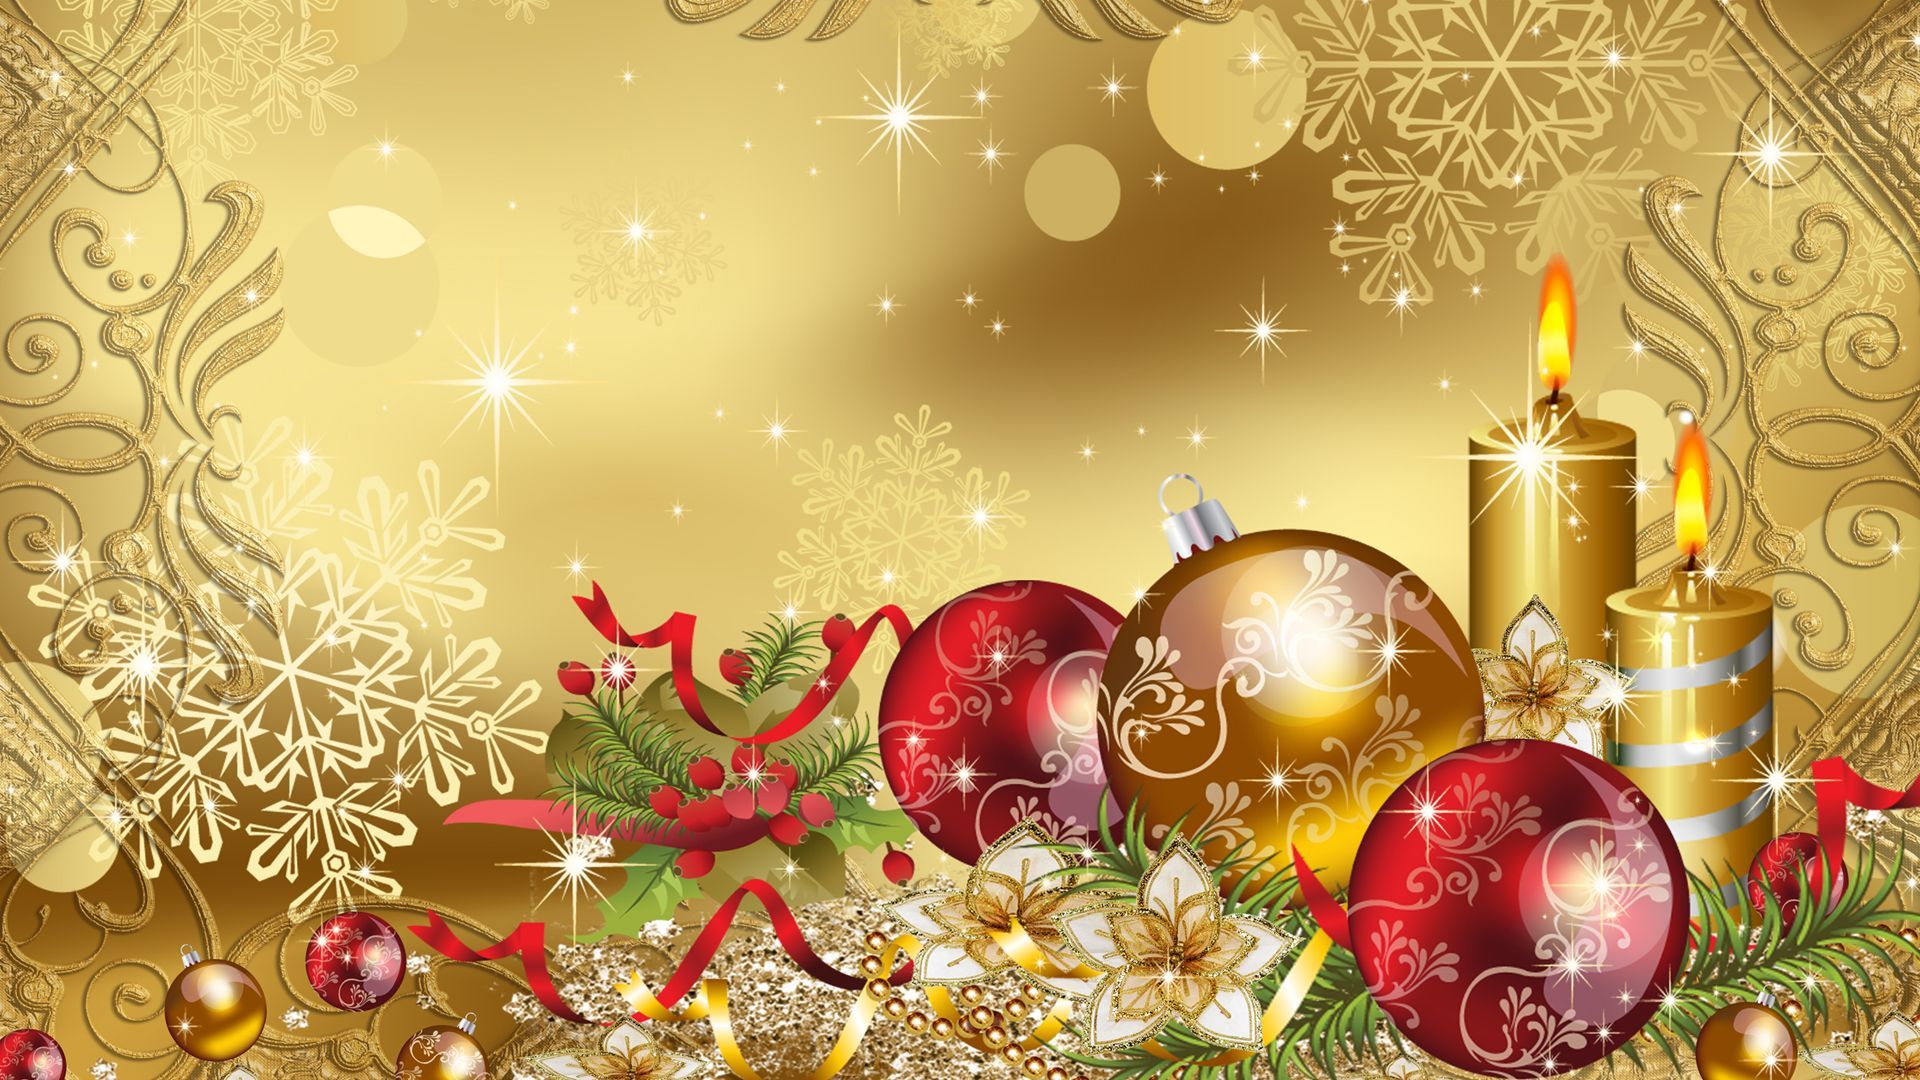 Gold Christmas Background. Free Gold Christmas Background. Christmas desktop wallpaper, Christmas desktop, Gold christmas wallpaper